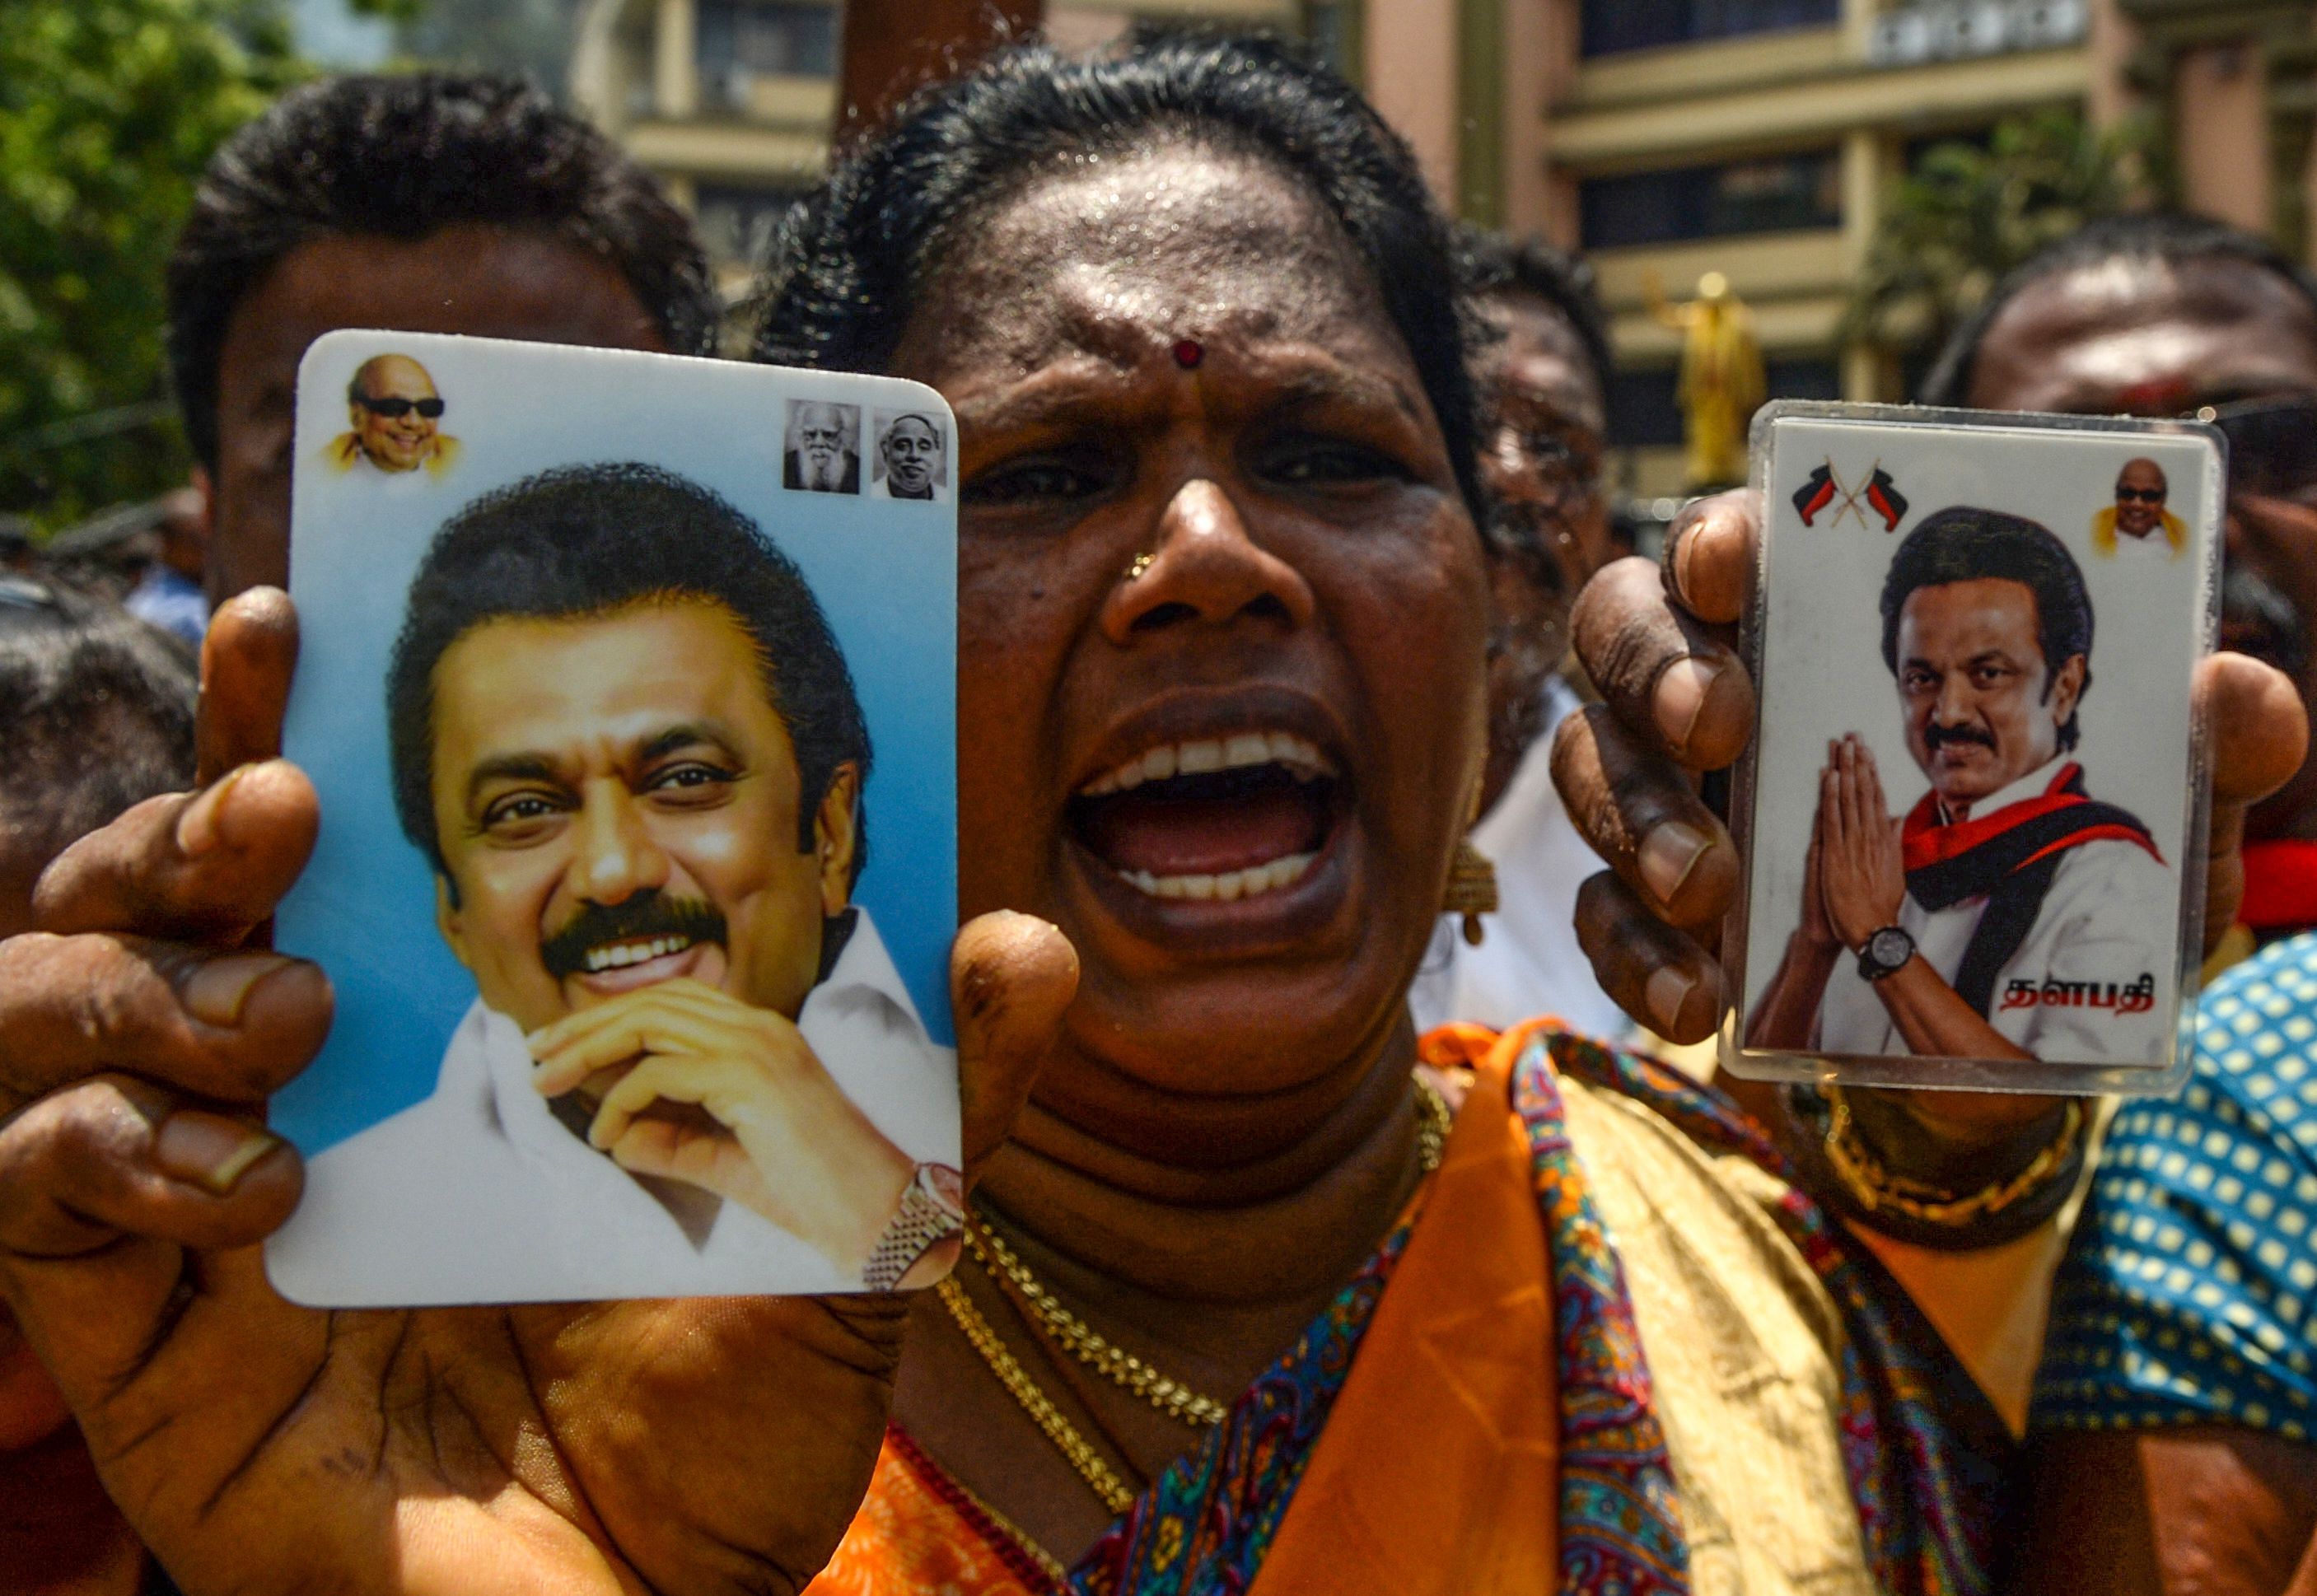 A member of the DMK shouts slogans and shows portraits of party president M.K. Stalin as she celebrates the election results in Chennai on May 23, 2019. Credit: Arun Sankar/AFP